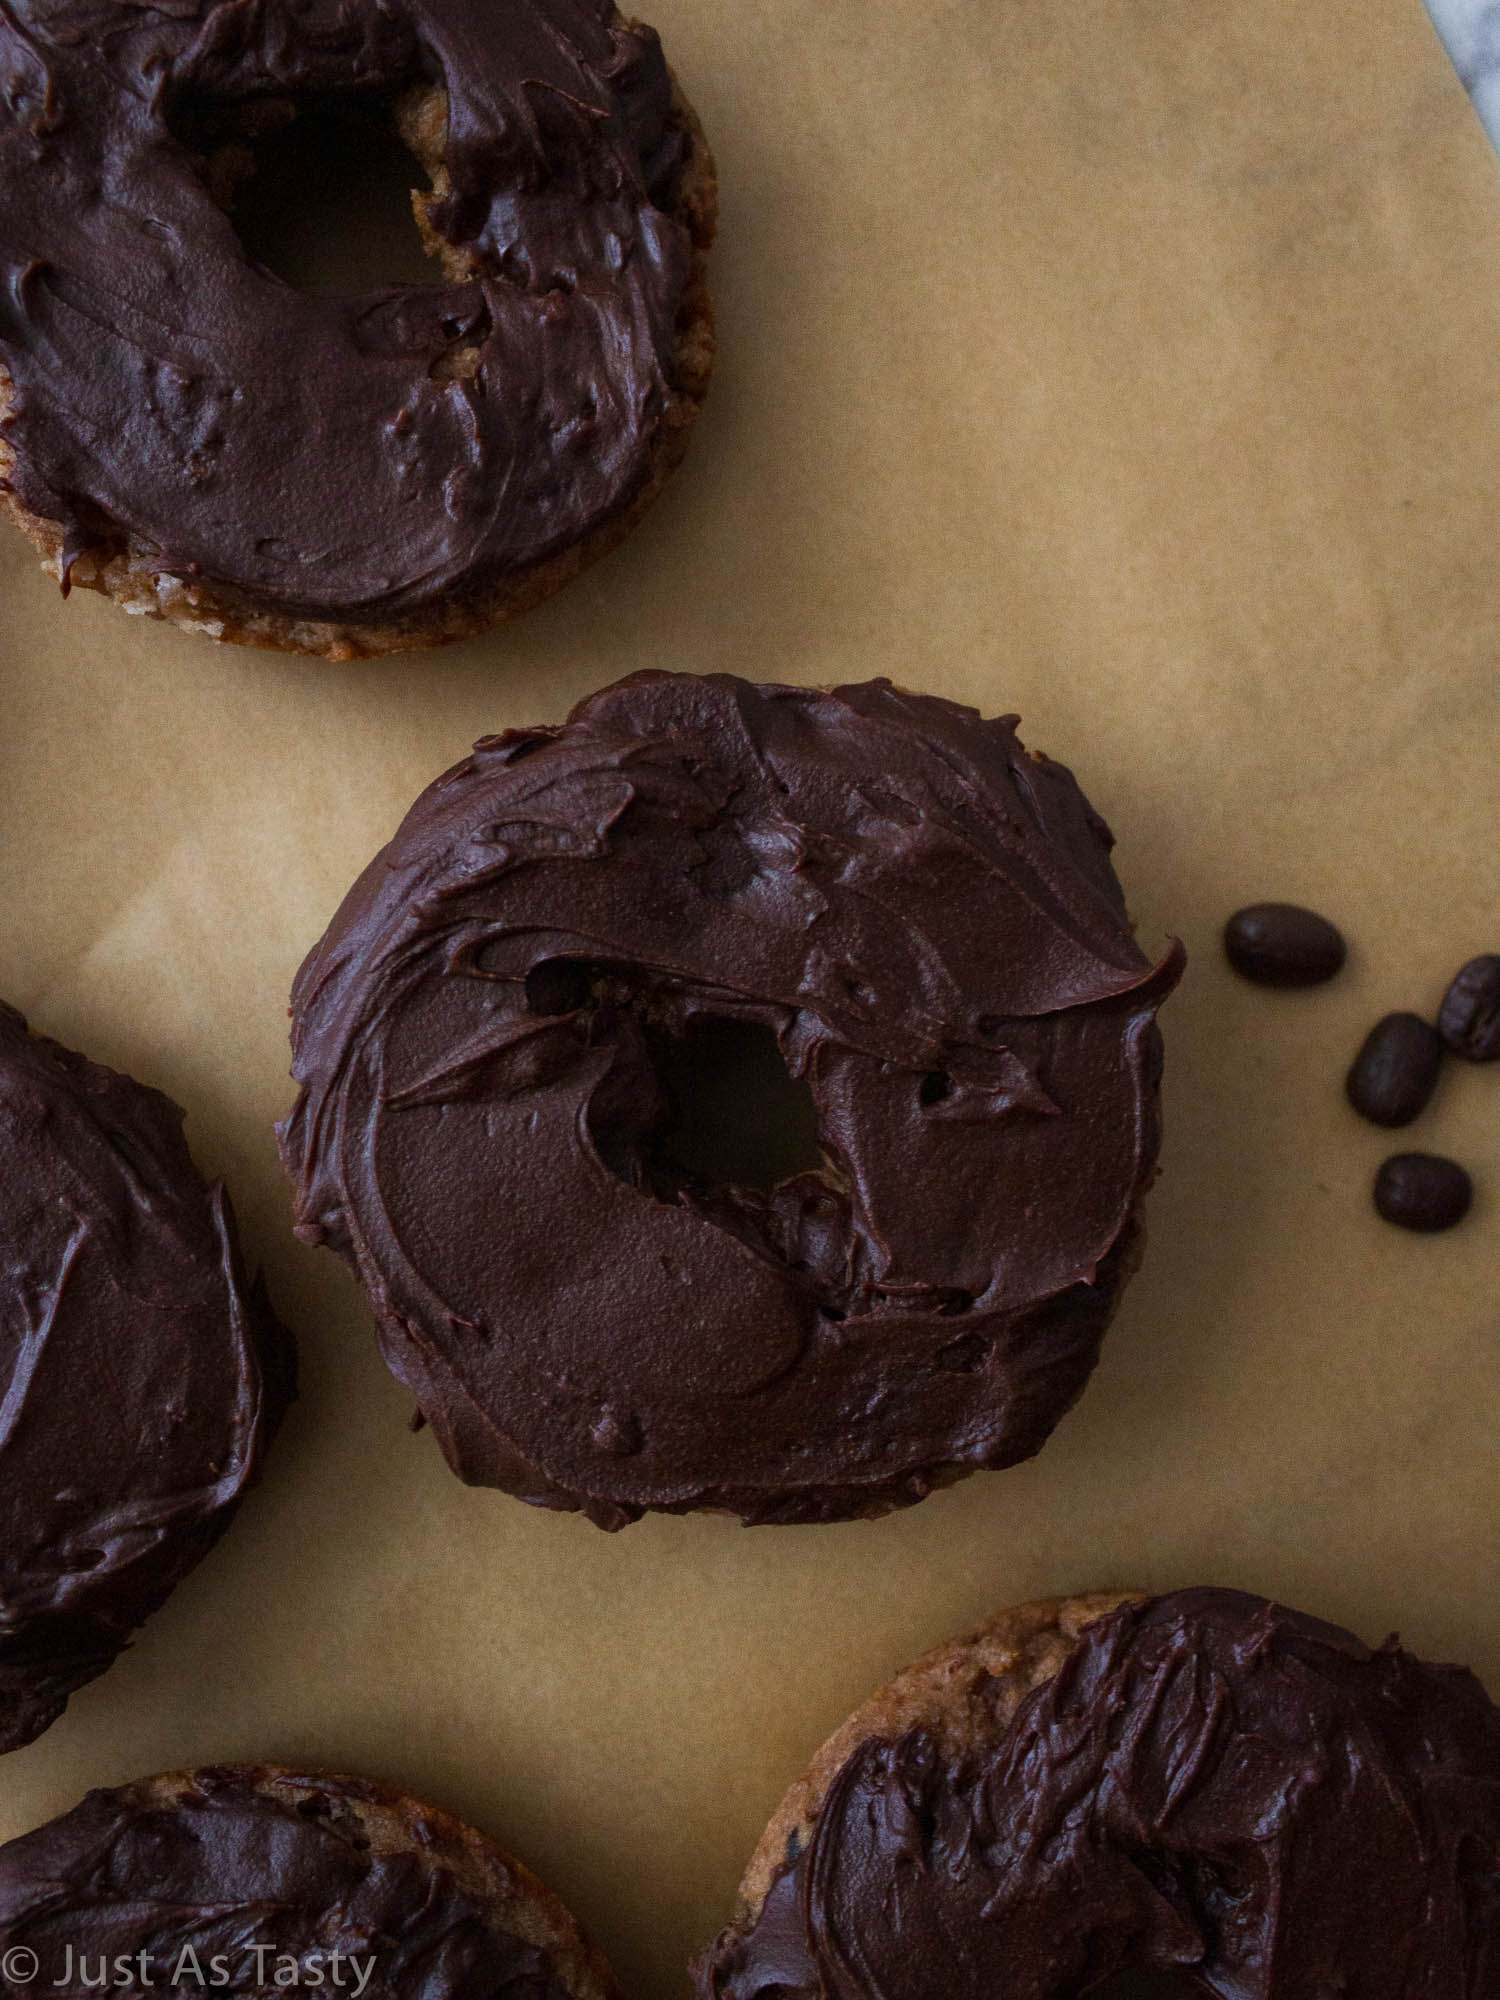 Close-up of a chocolate covered coffee donut on brown parchment paper.